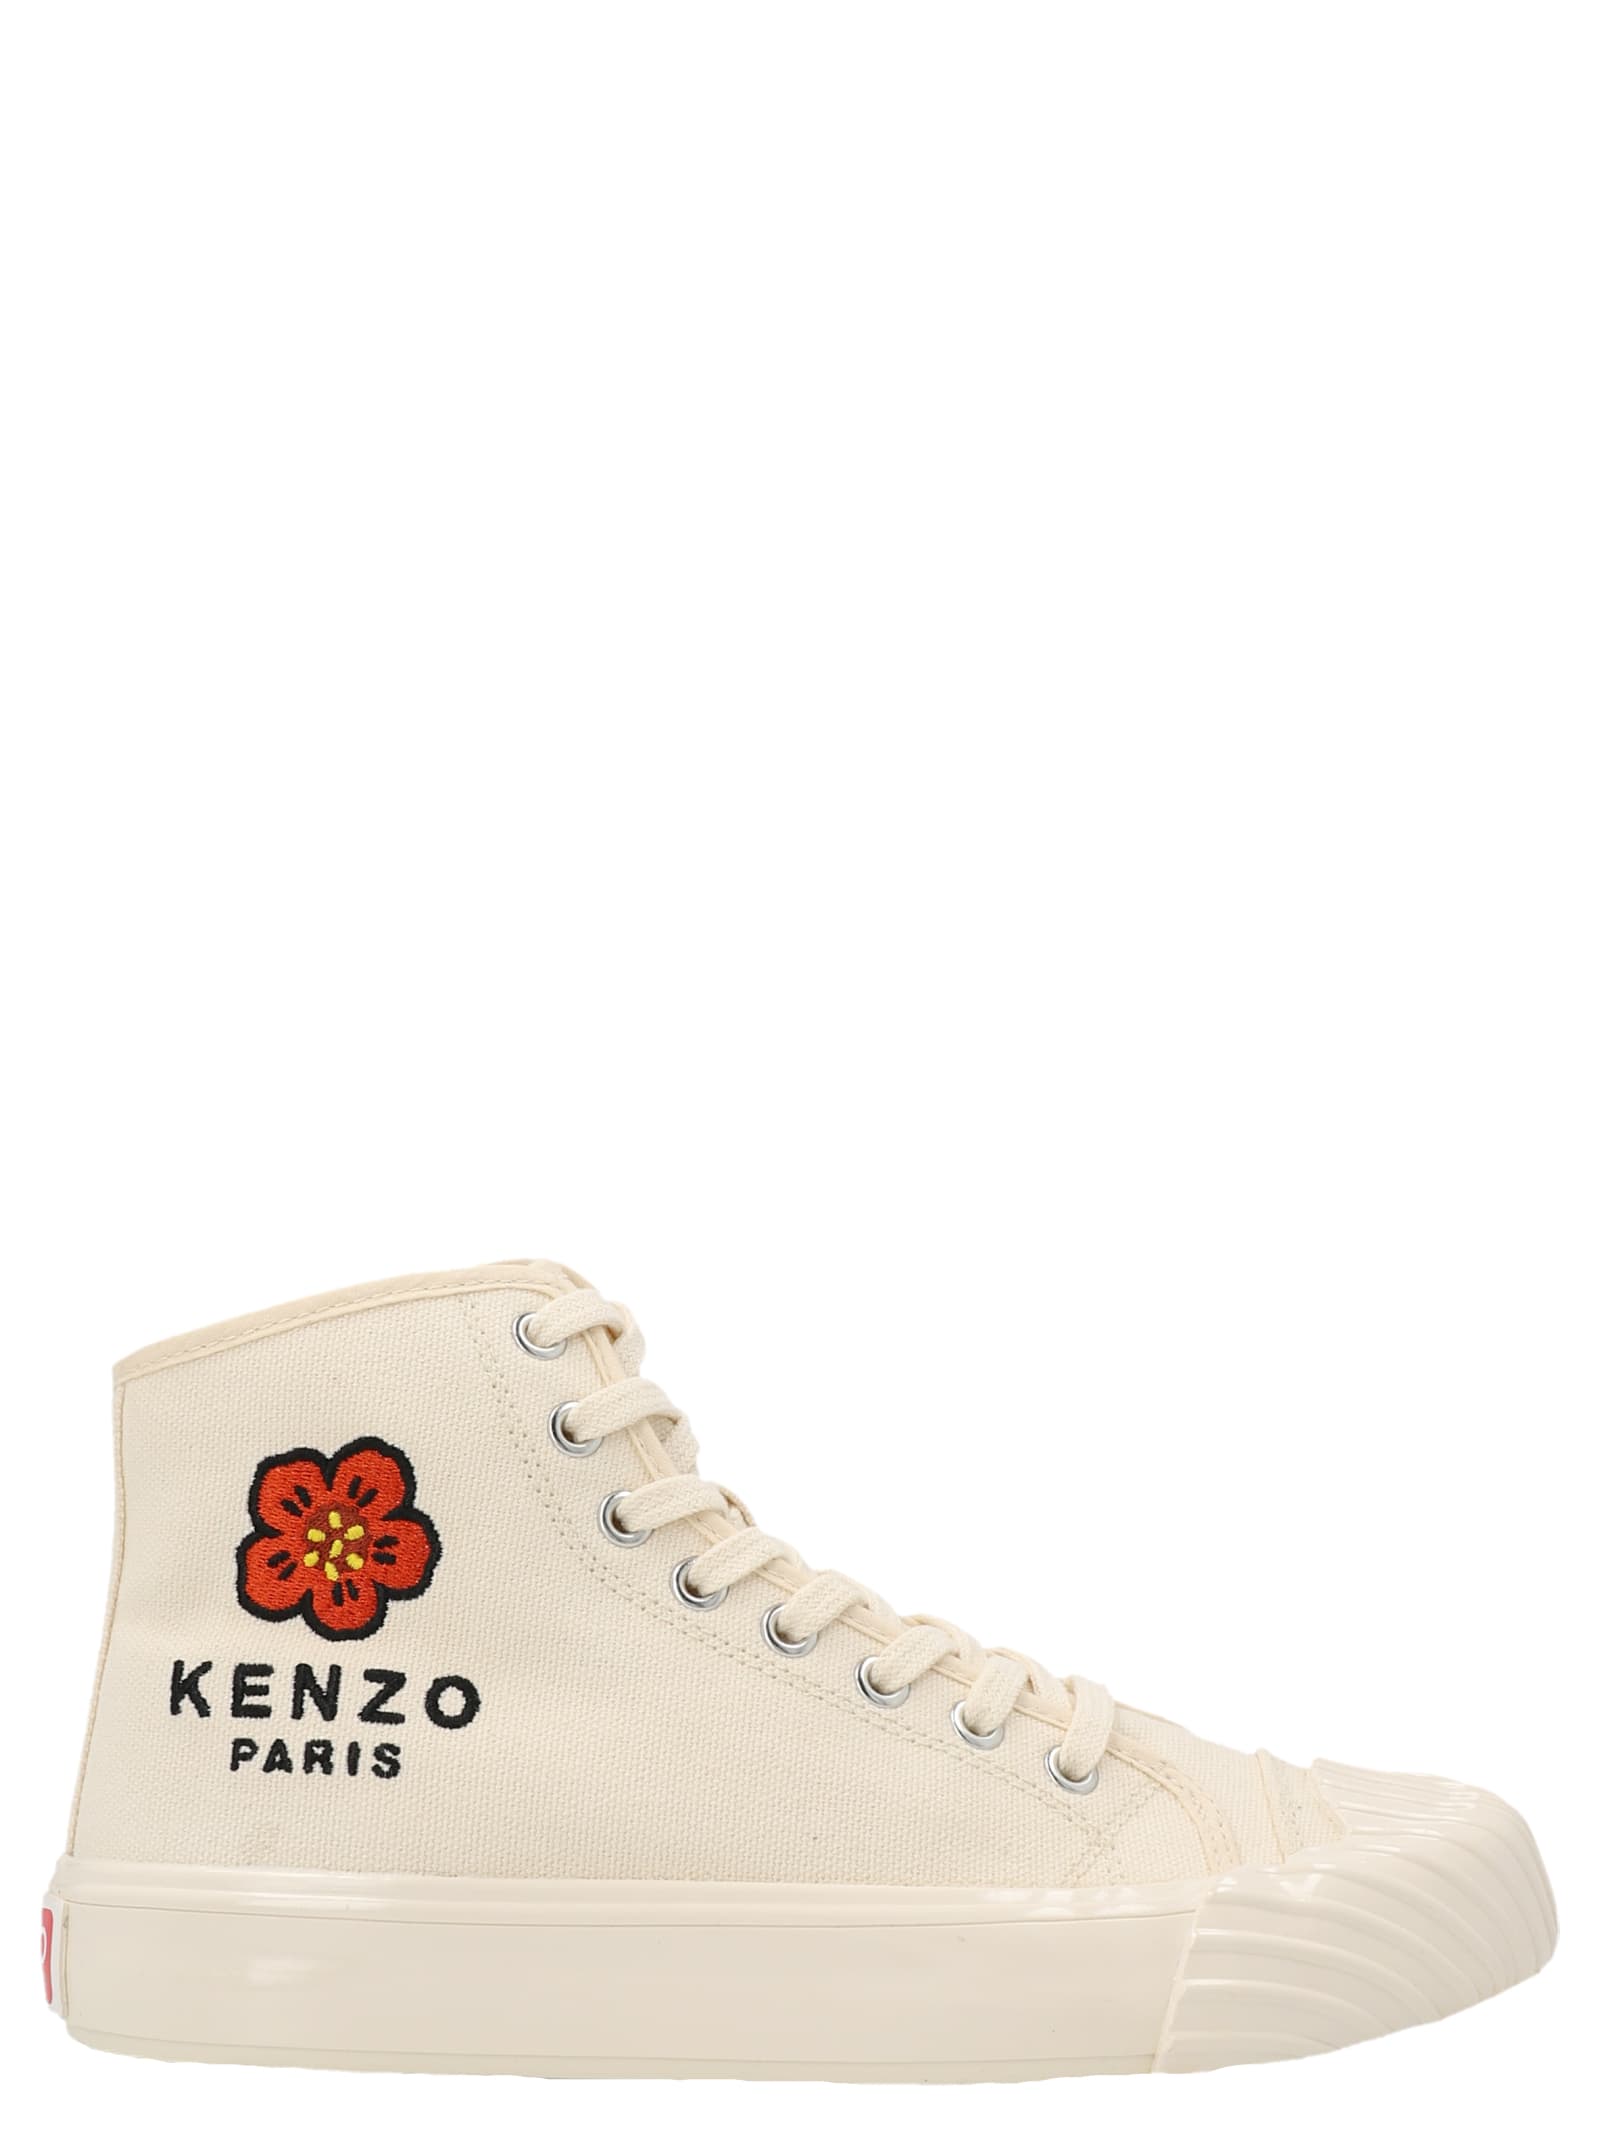 Kenzo Embroidered Logo Sneakers